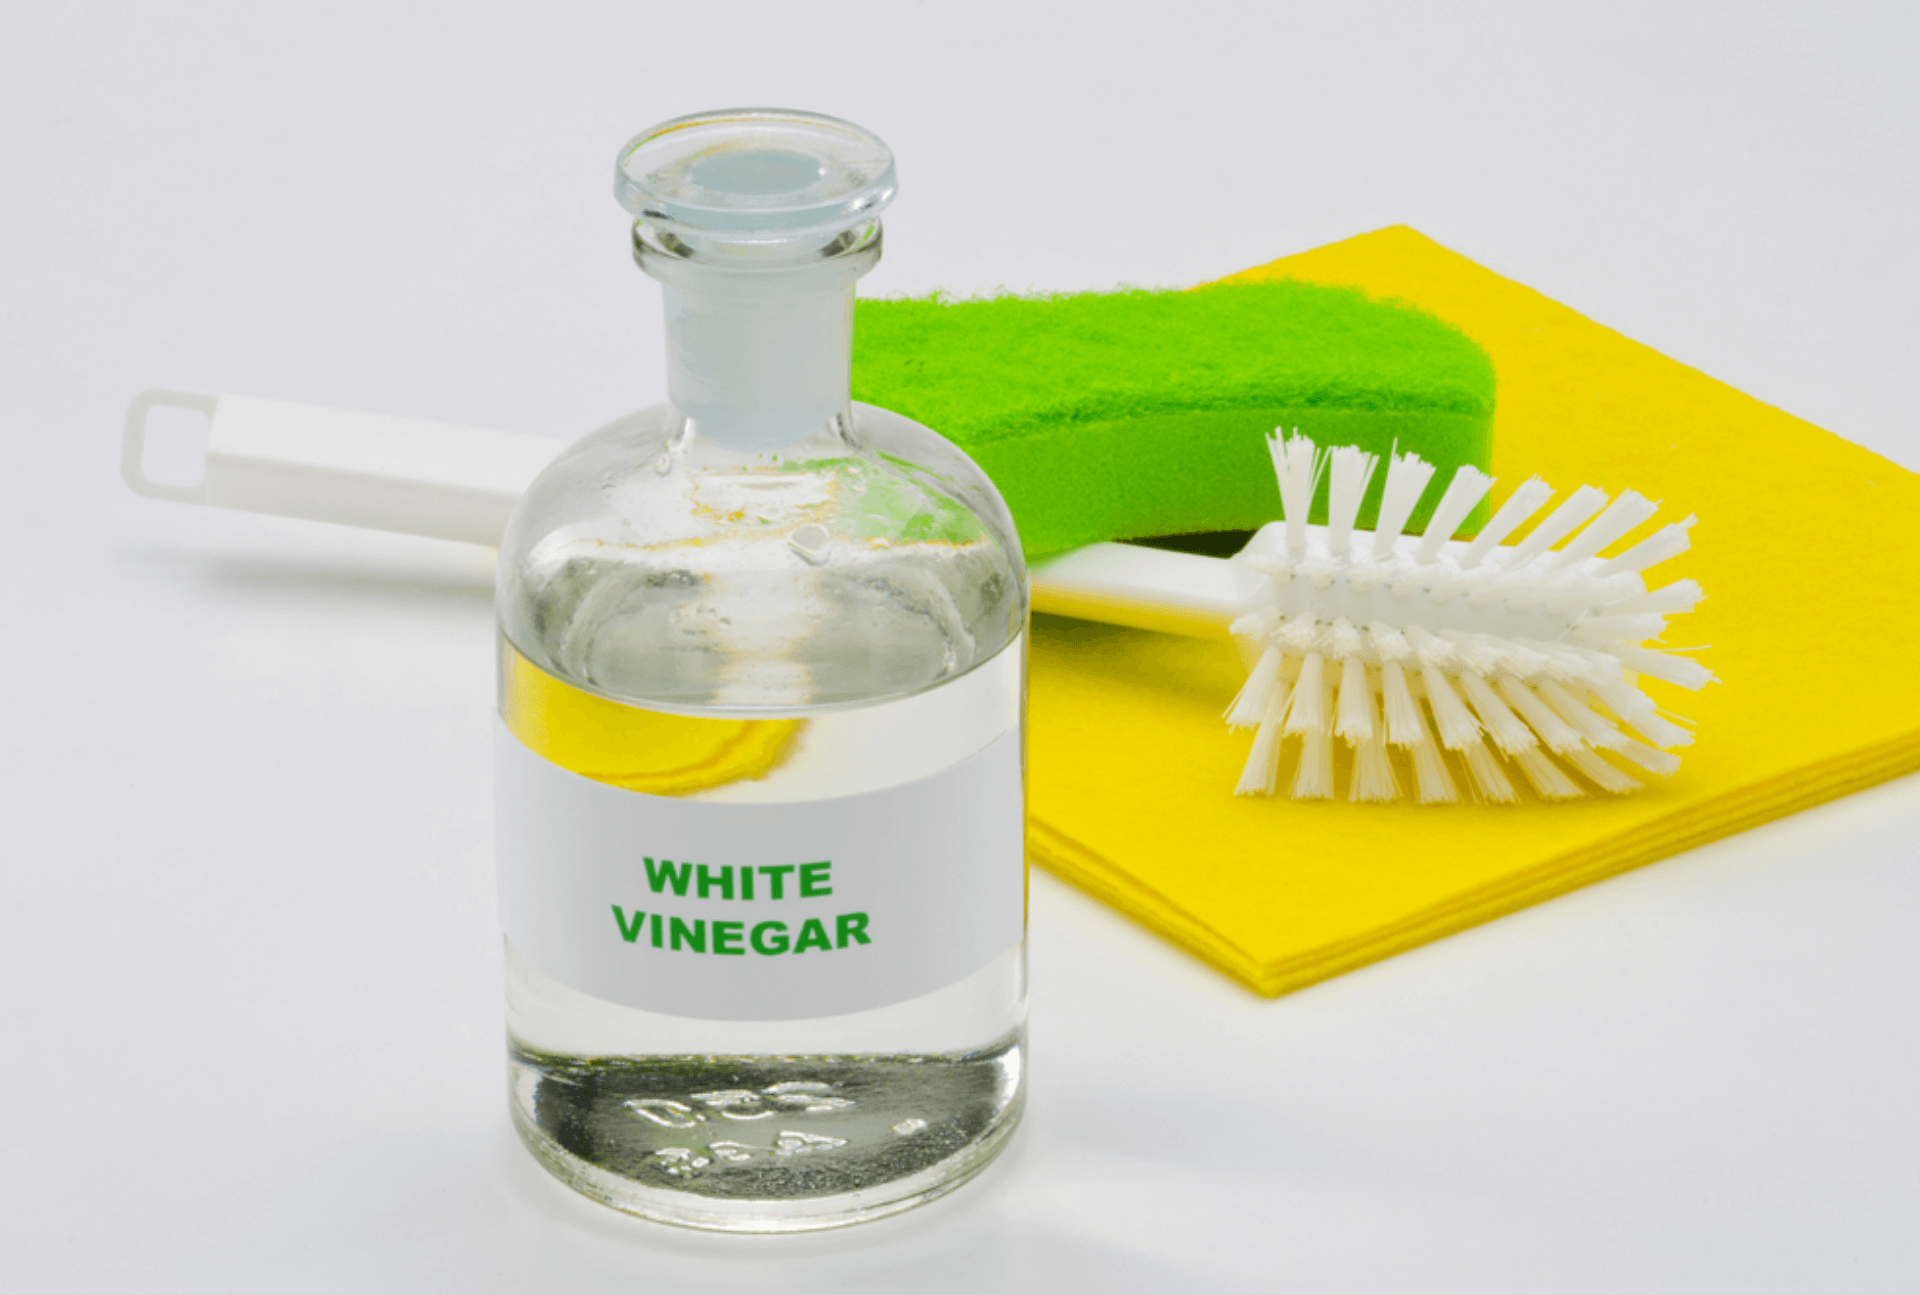 5 Do’s and Don’ts of Cleaning With Vinegar